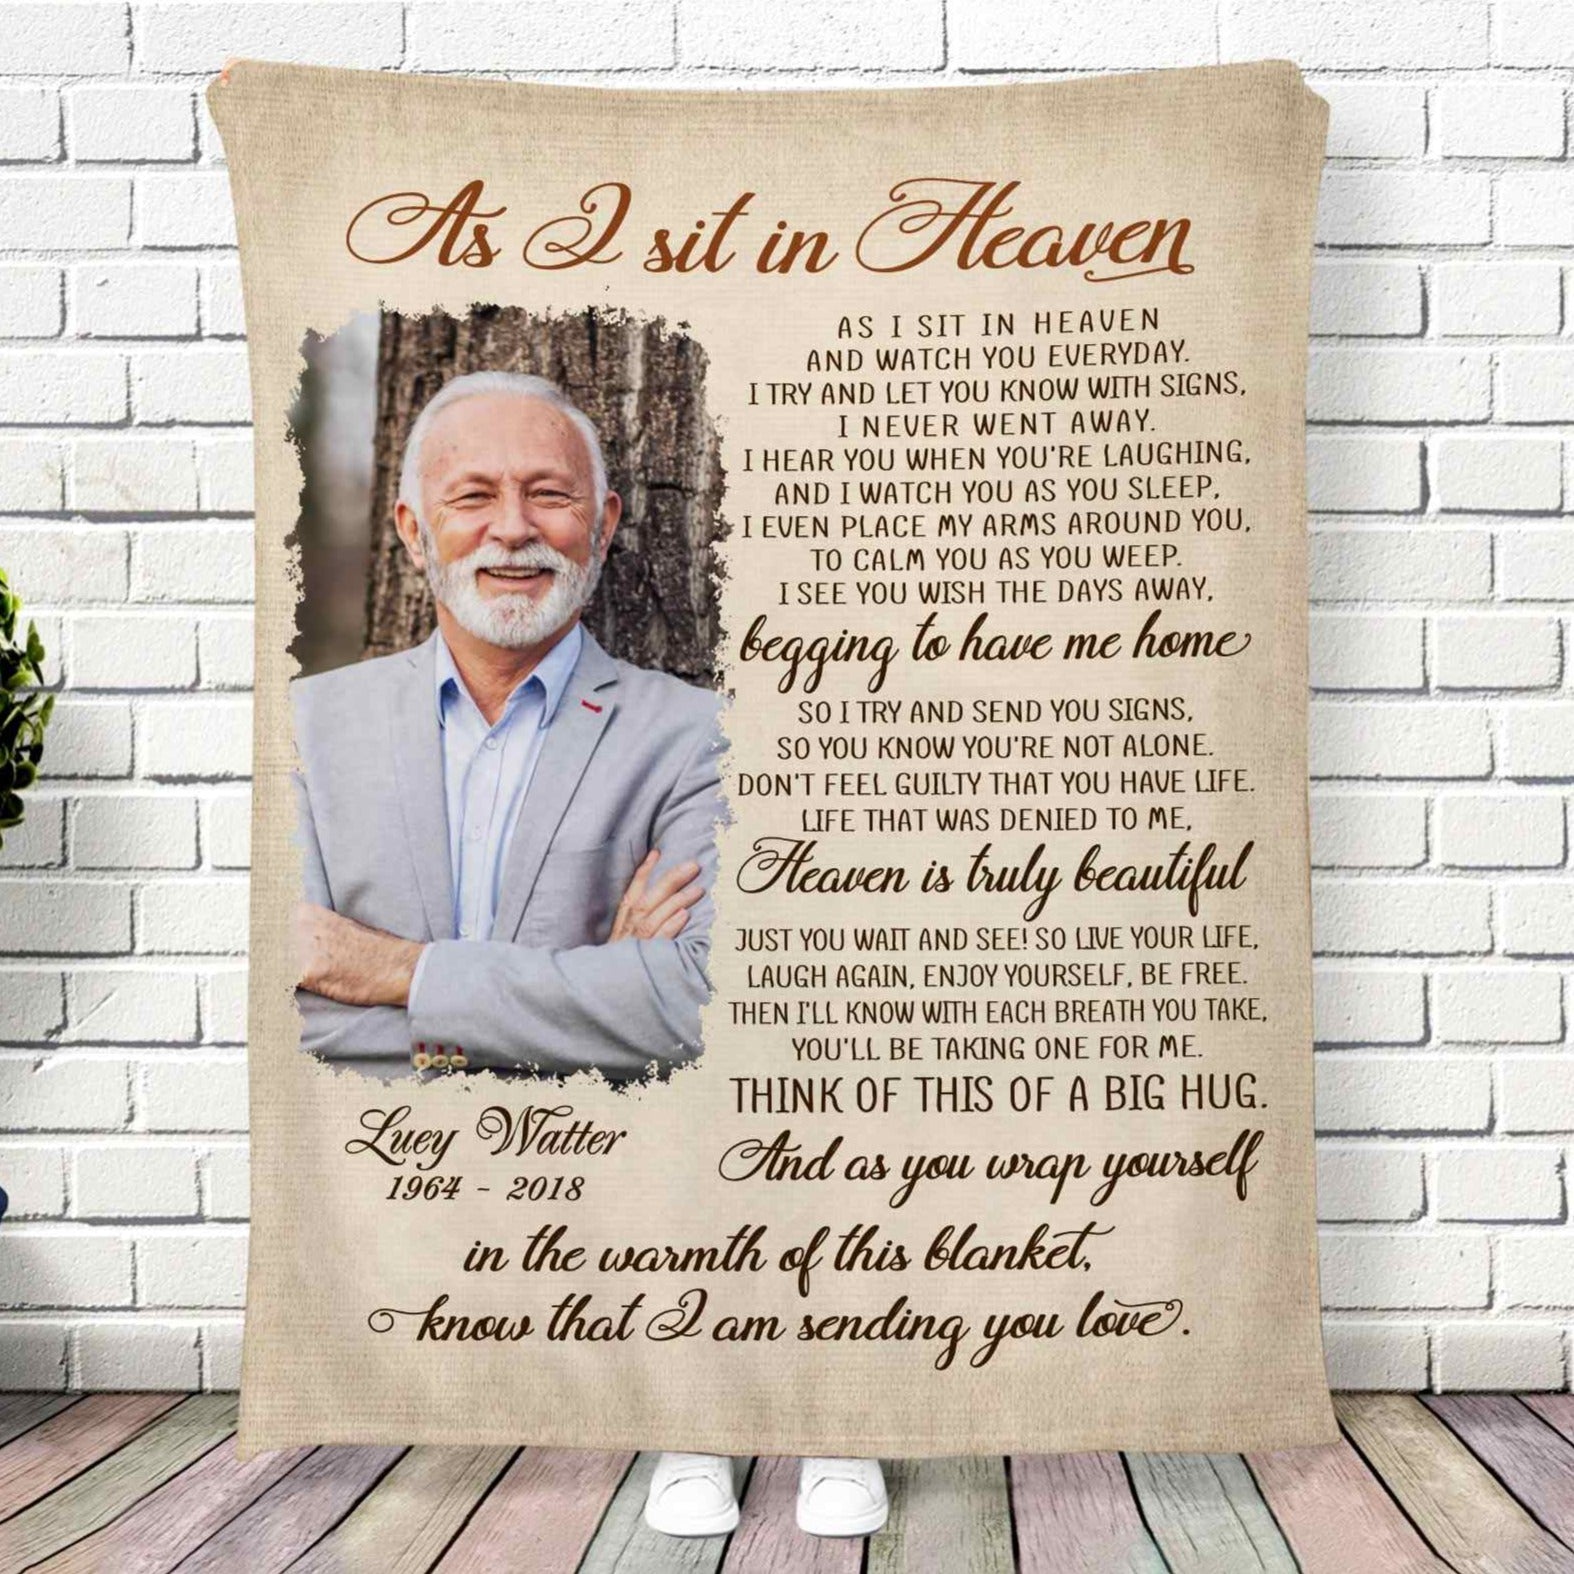 Memorial Gifts For Loss Of Husband As I Sit In Heaven Photo Memory Blanket